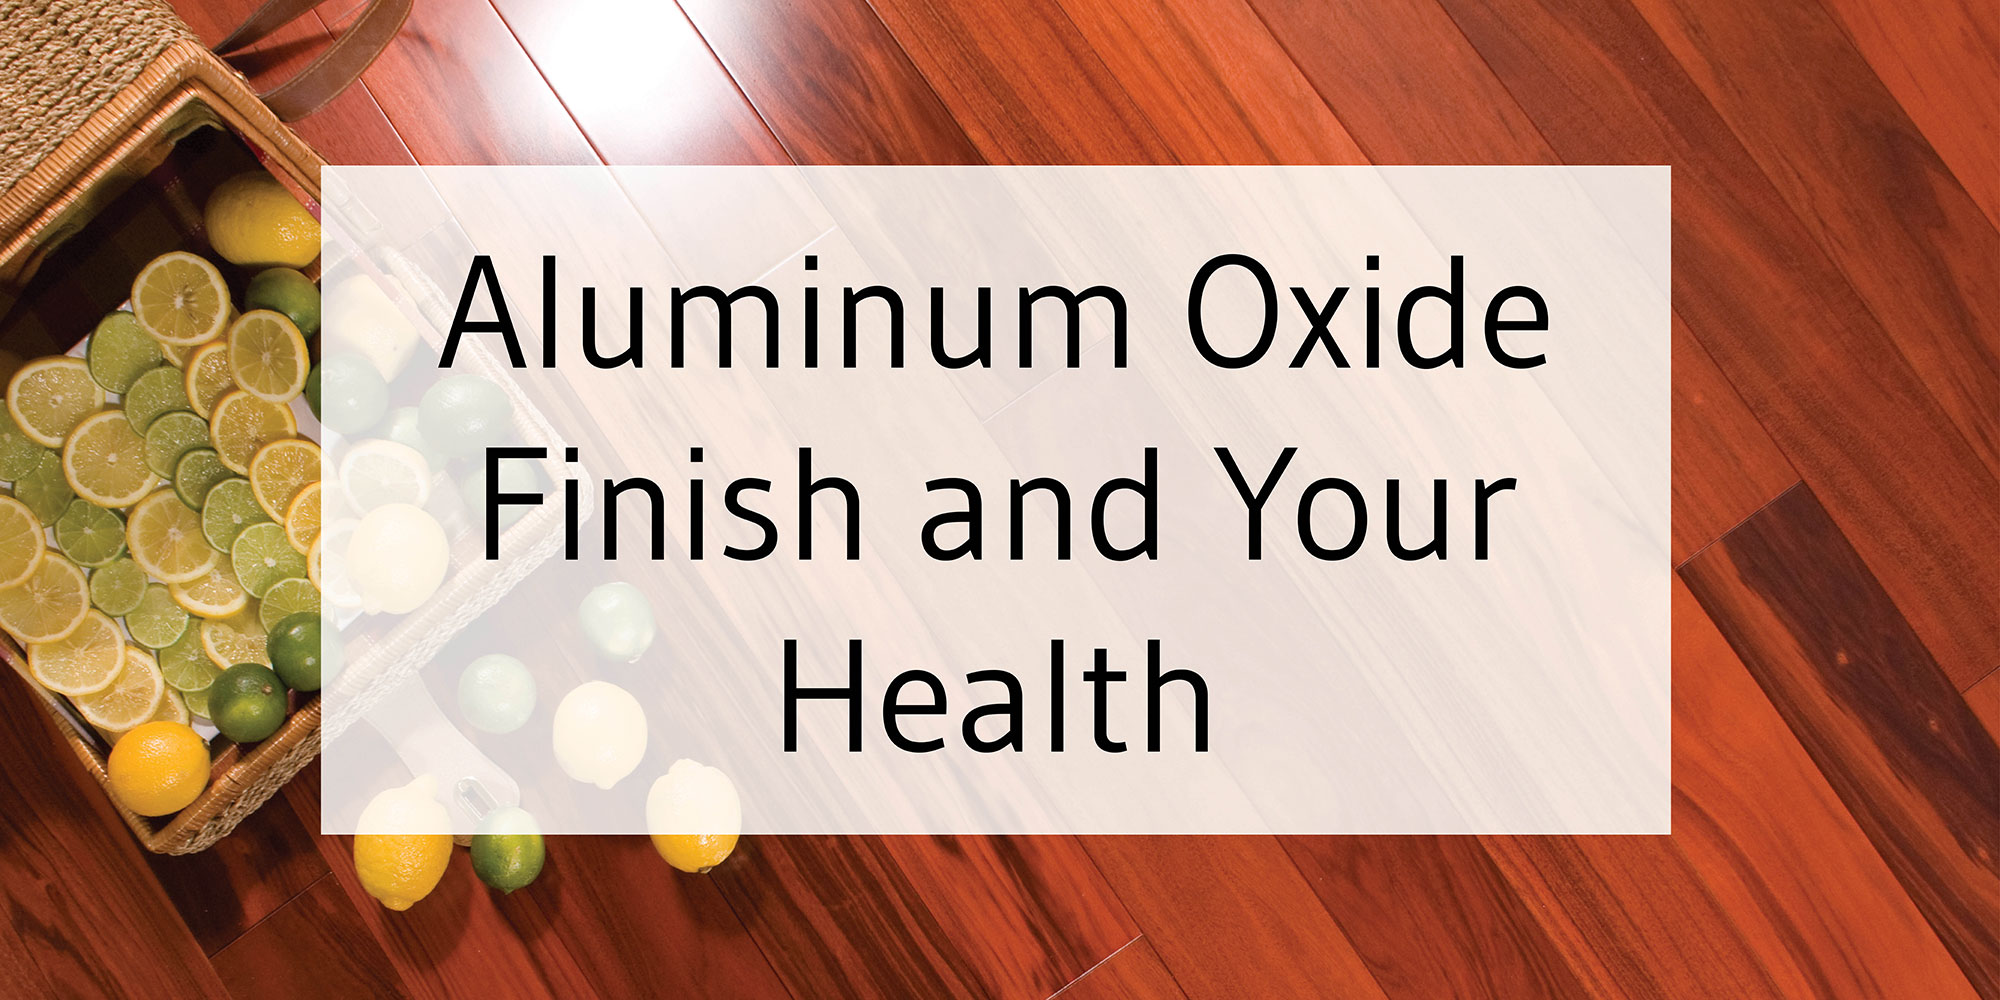 Aluminum Oxide Finish And Your Health, Is Hardwood Floor Sealer Toxic